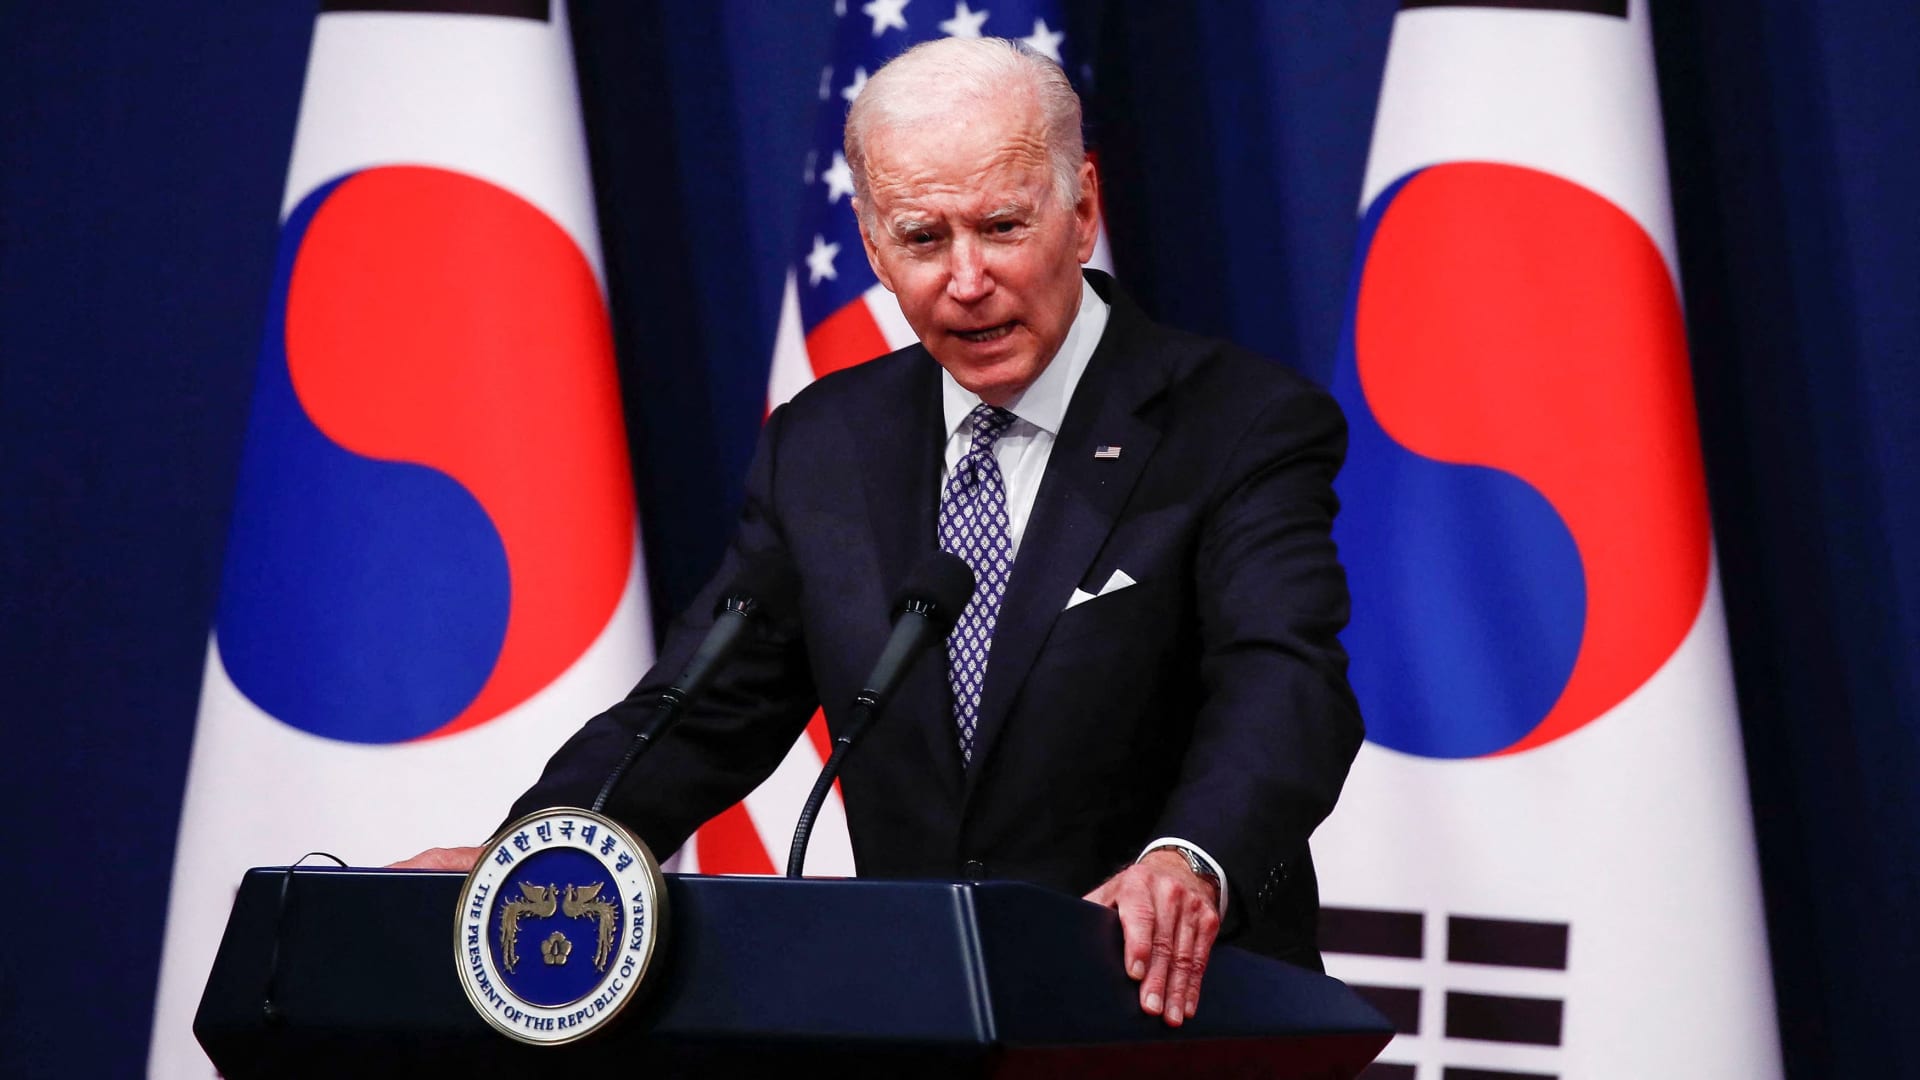 U.S. President Joe Biden speaks during a joint news conference with South Korean President Yoon Suk-yeol at the Presidential office in Seoul, South Korea, May 21, 2022. 